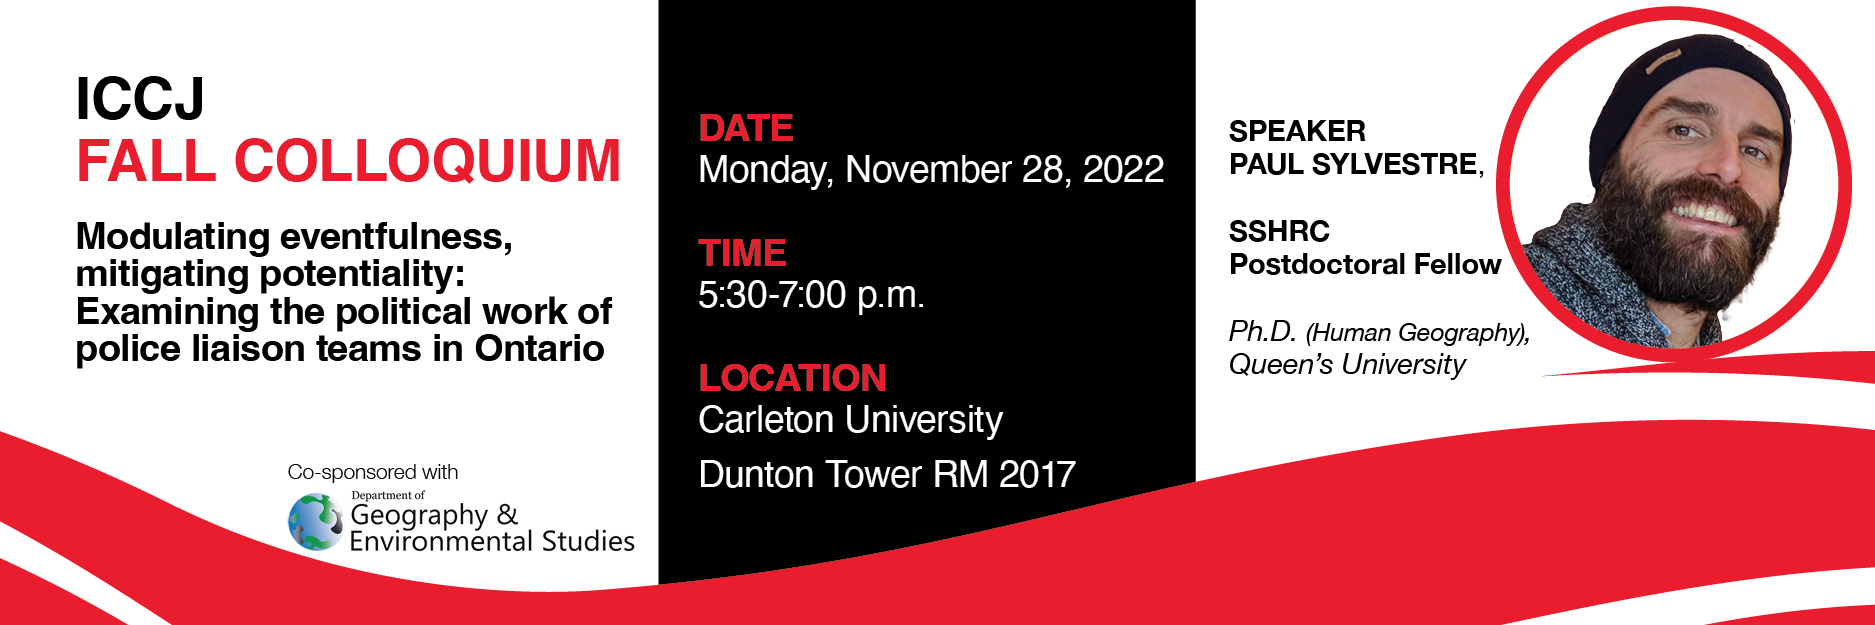 An ad promoting the upcoming ICCJ Fall Colloquium event on November 28, 2022 at 5:30 pm at Dunton Tower Rm 2017.